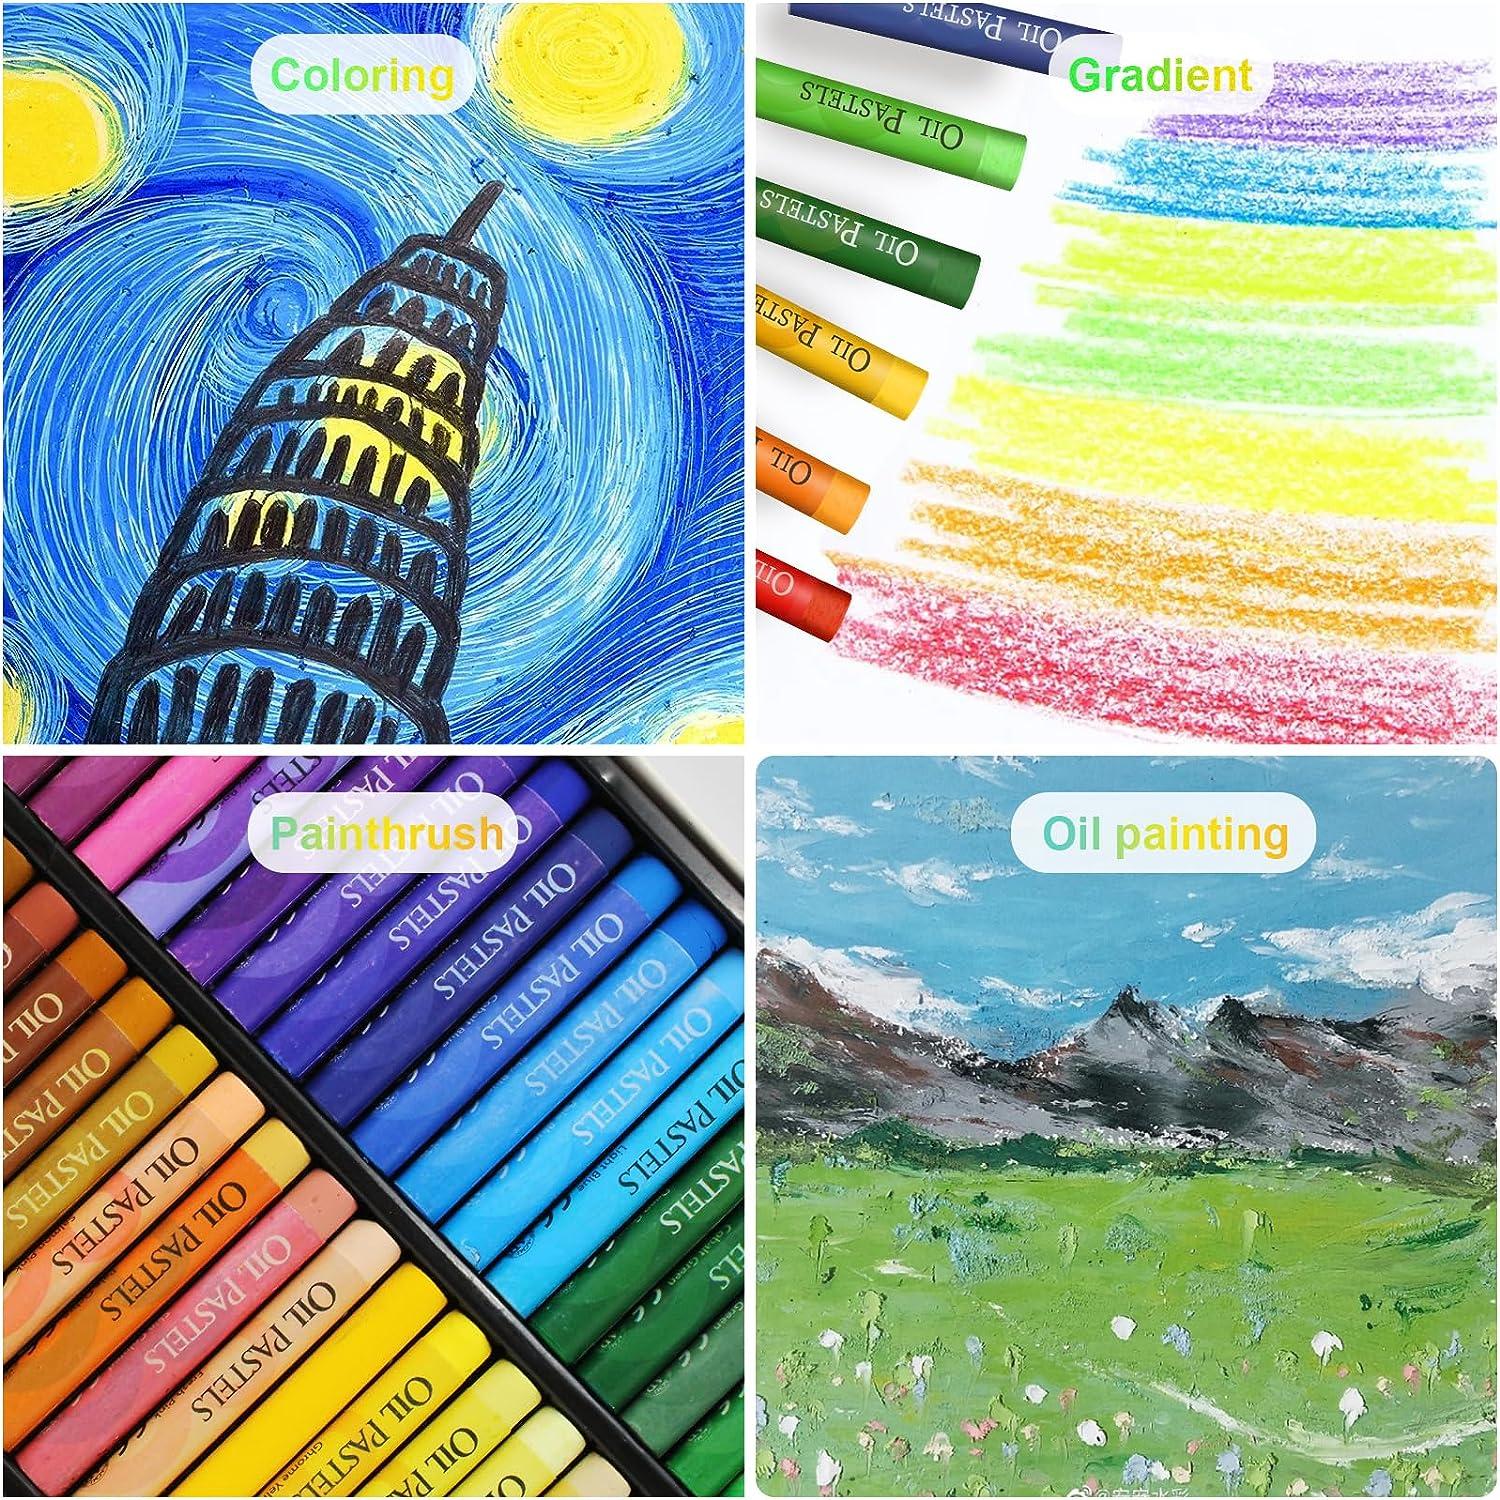 What is the difference between crayons and oil pastels?